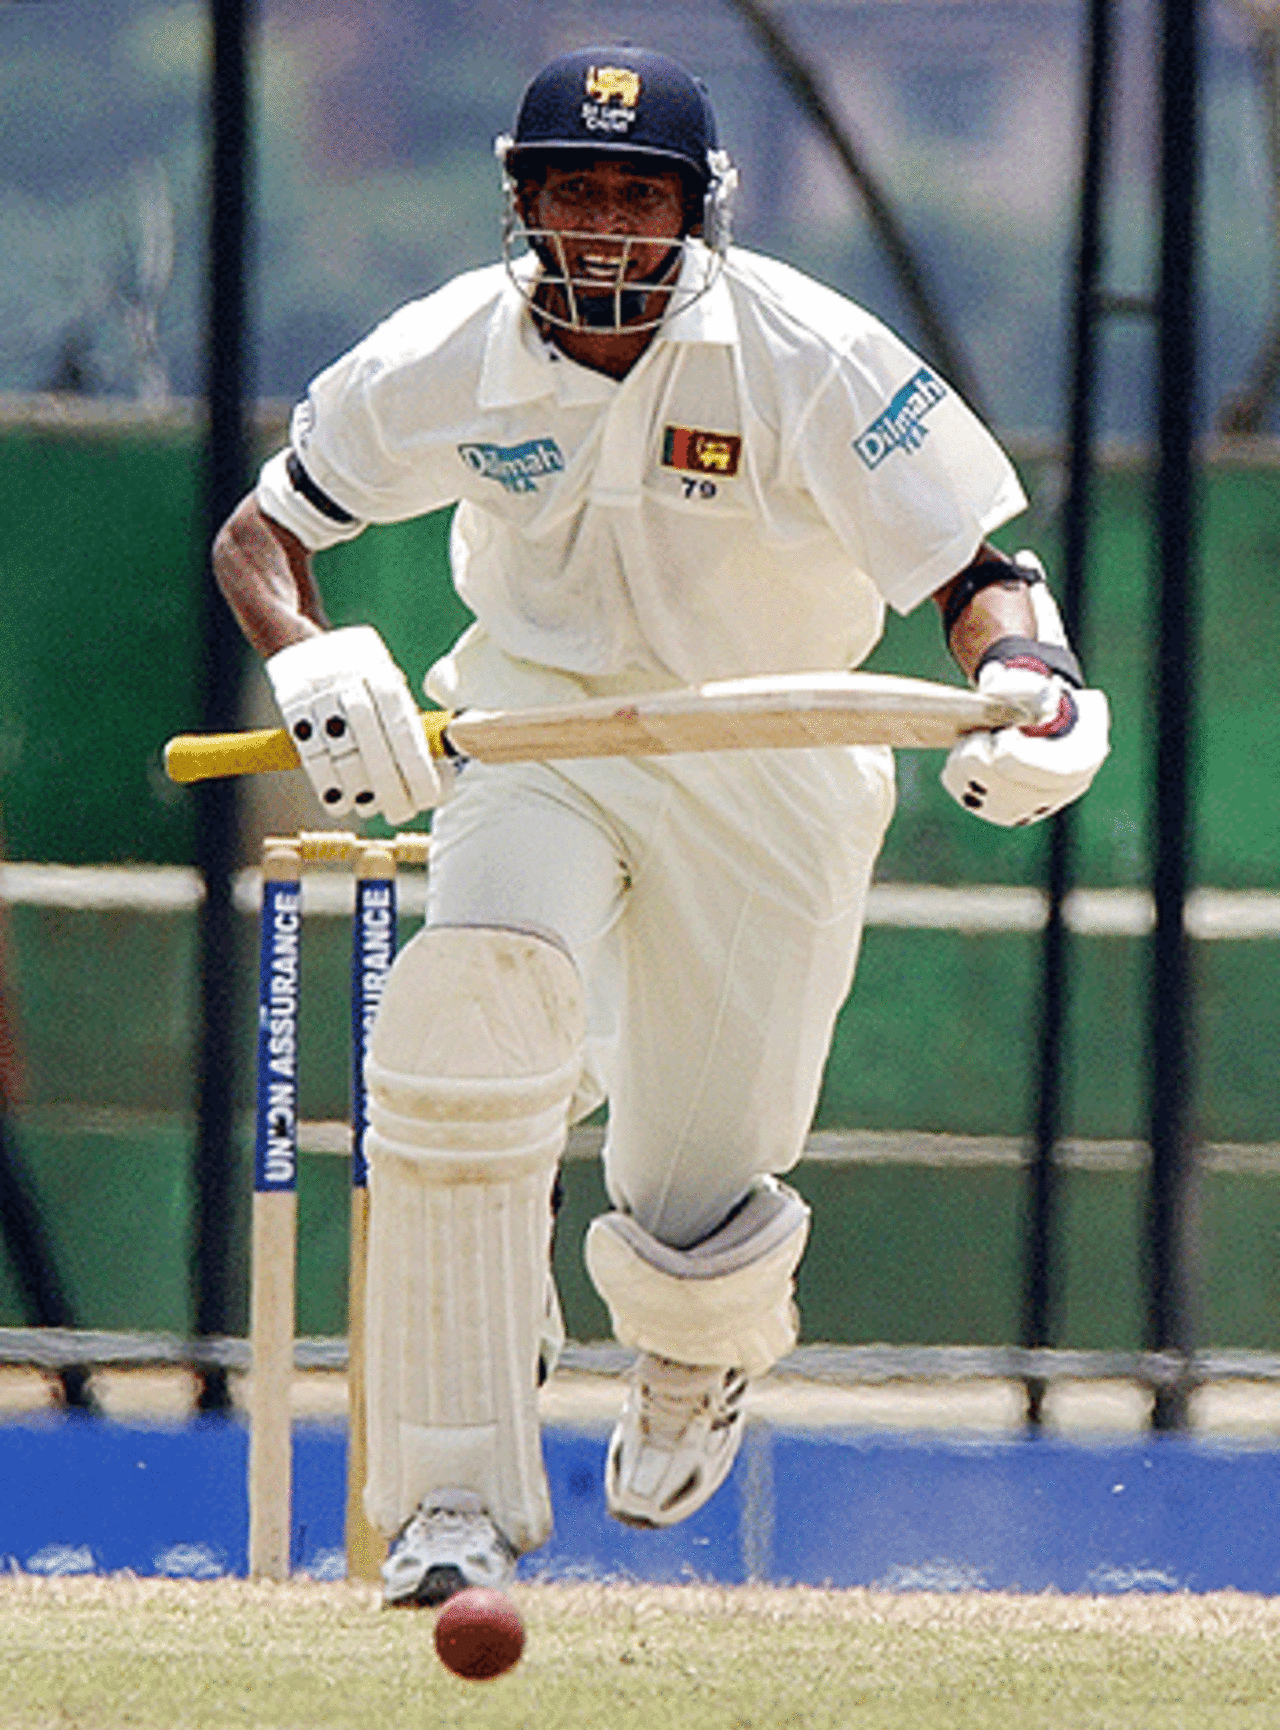 Sri Lankan batsman Tillakaratne Dilshan runs between wickets during the first day of the second and final Test match between Sri Lanka and West Indies at the Asgiriya grounds in Kandy, 22 July 2005.